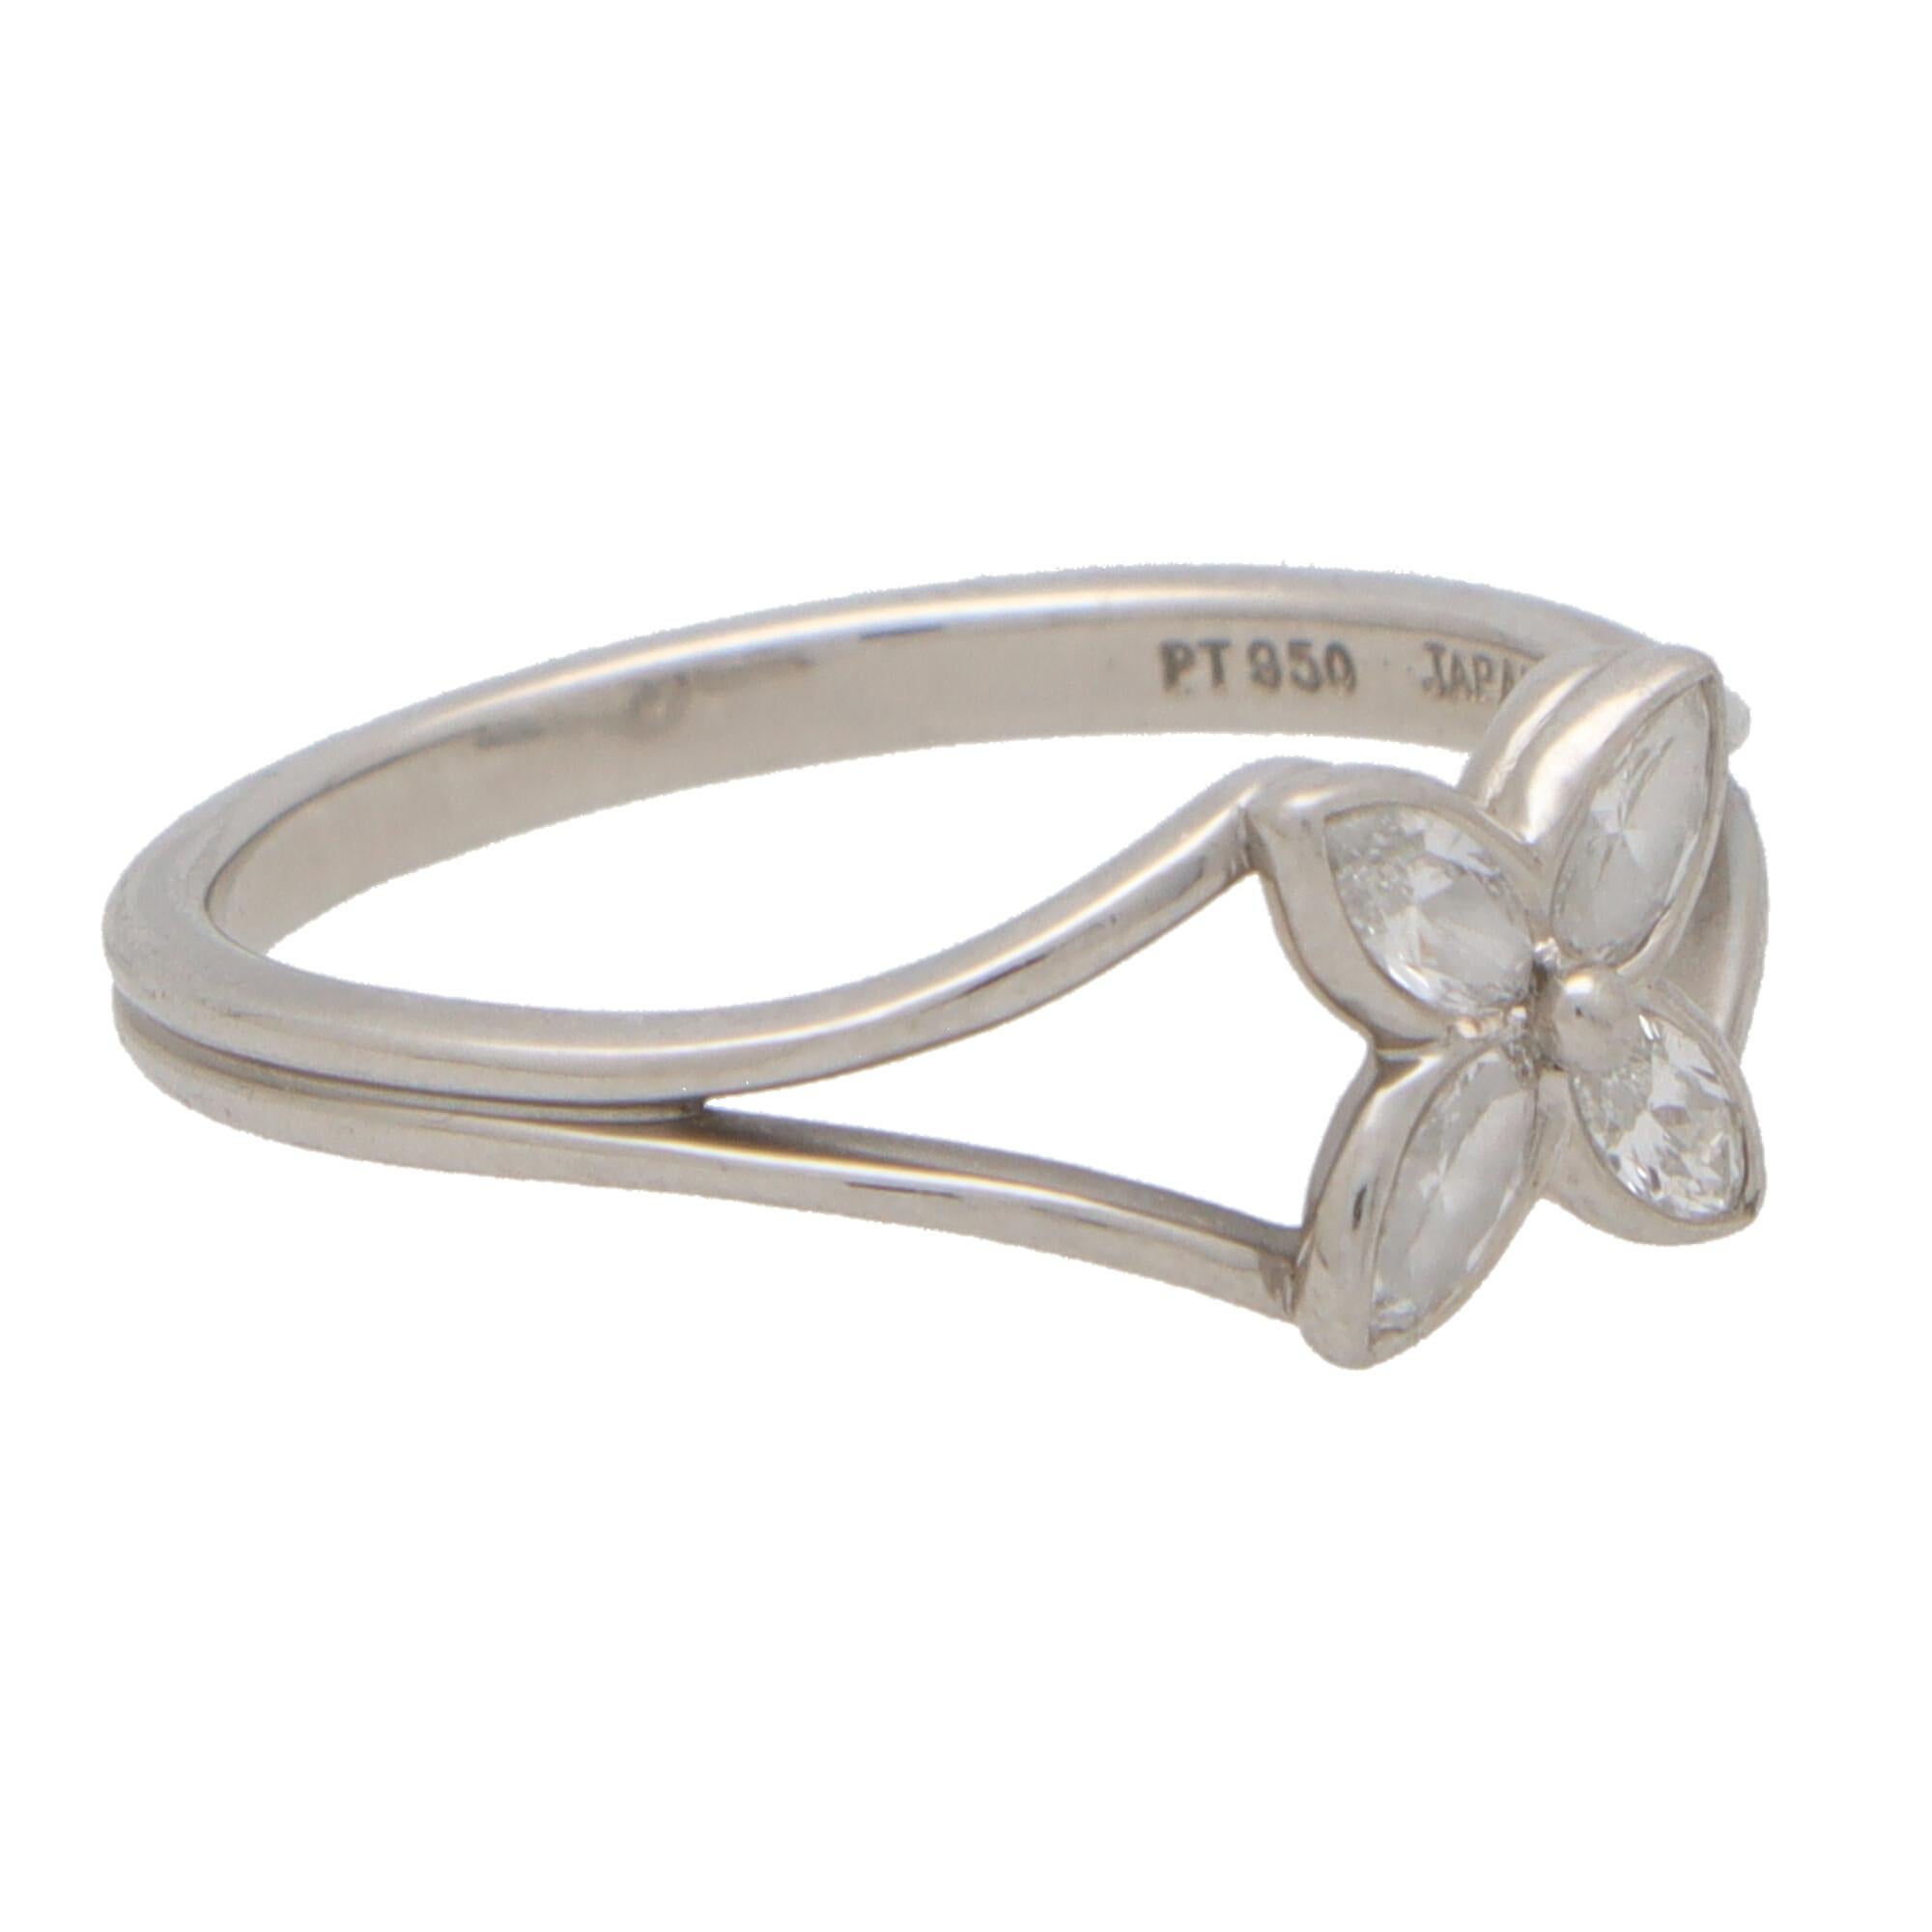 tiffany and co butterfly ring